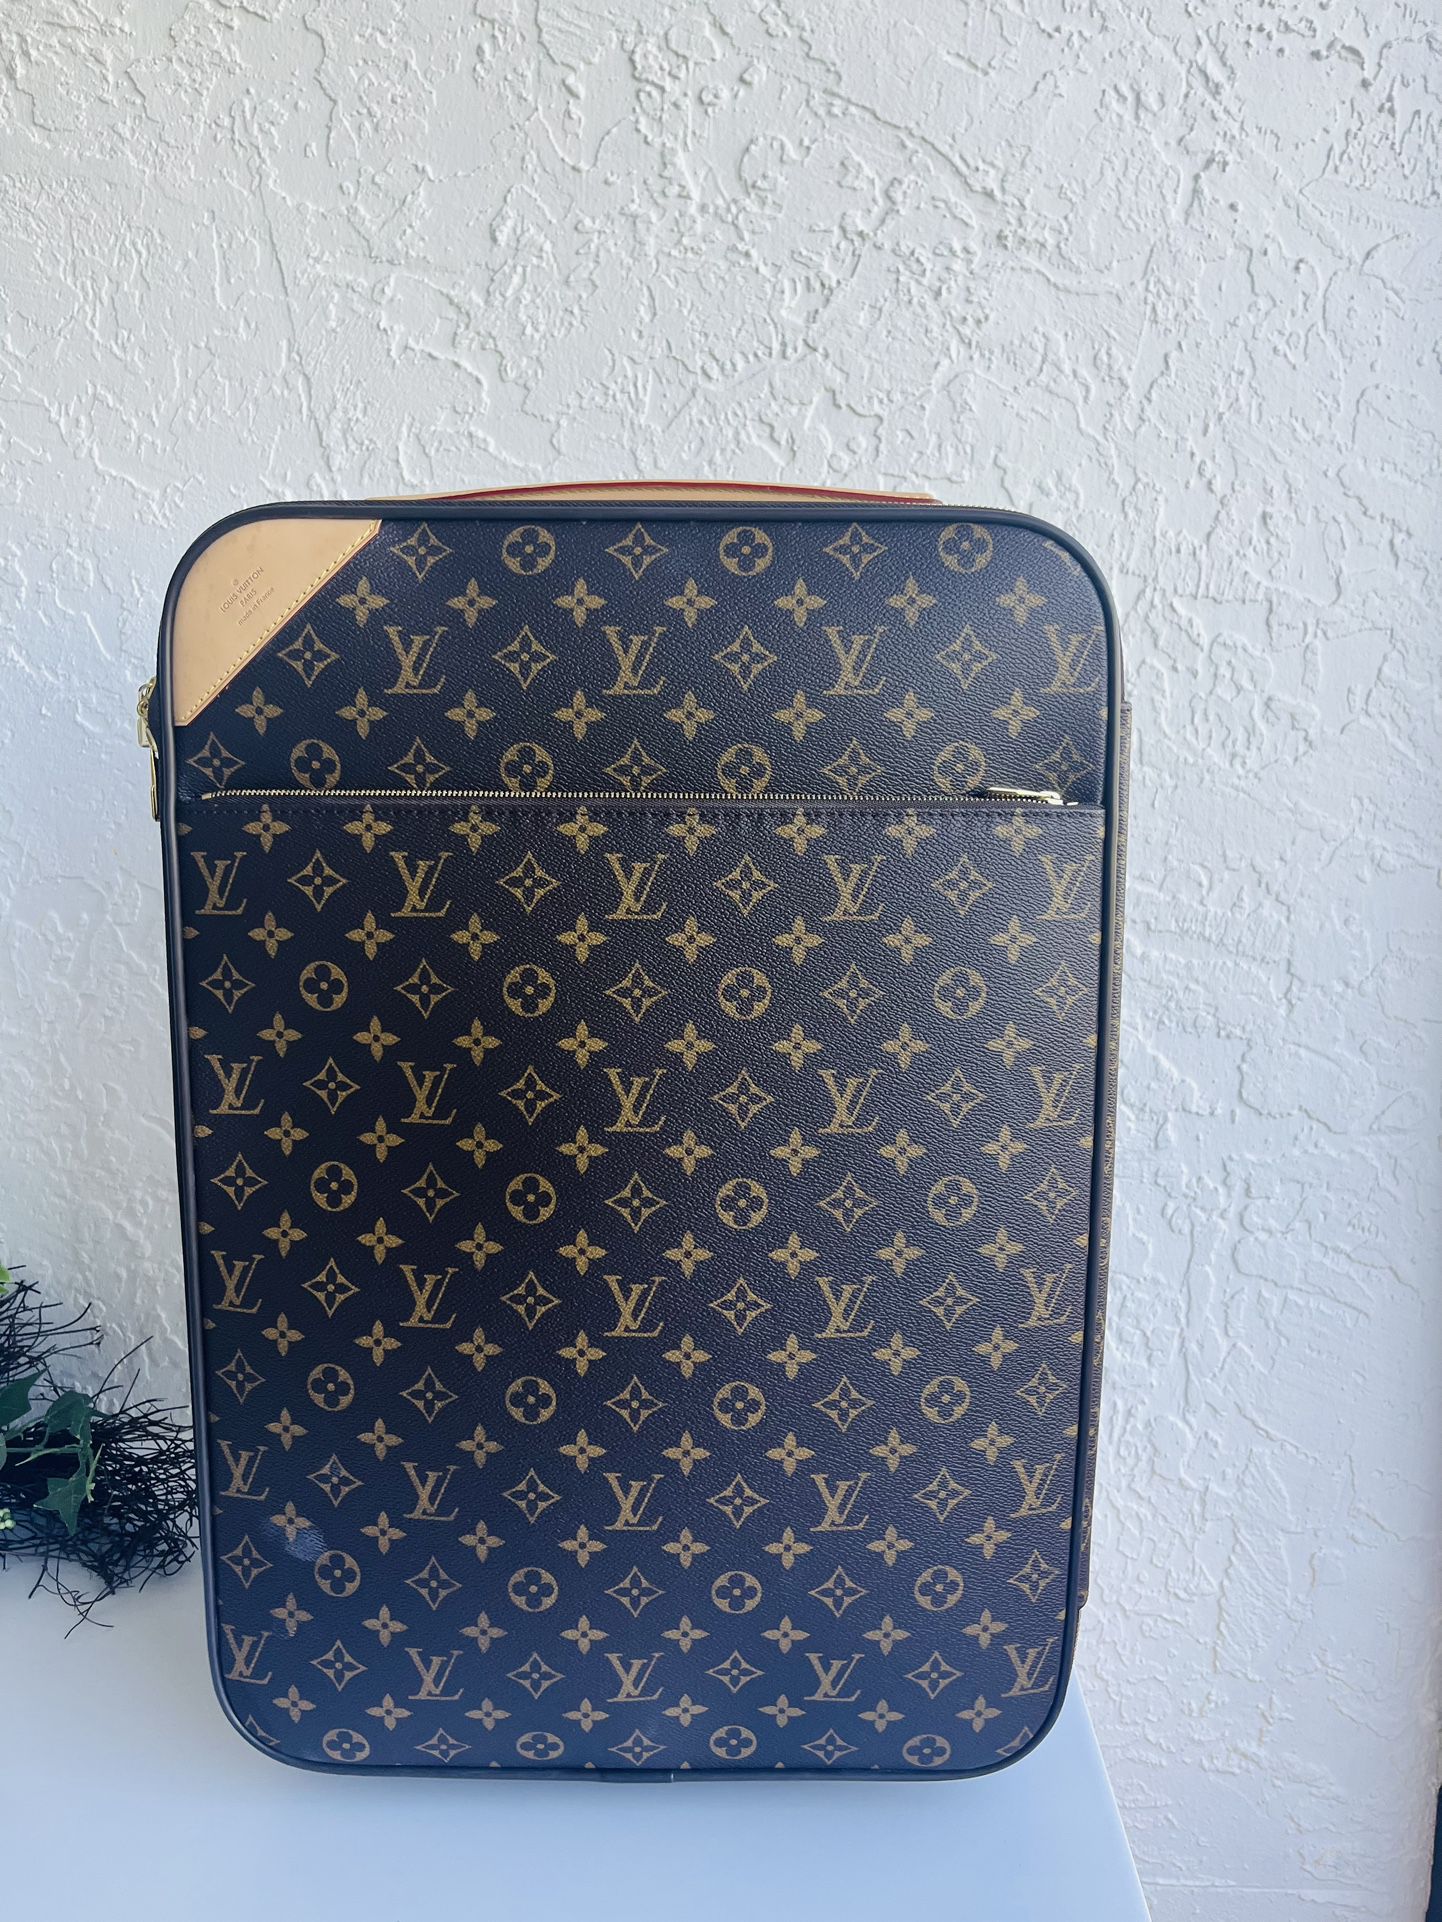 Luxury LV Carry-on Bag for Sale in Boca Raton, FL - OfferUp